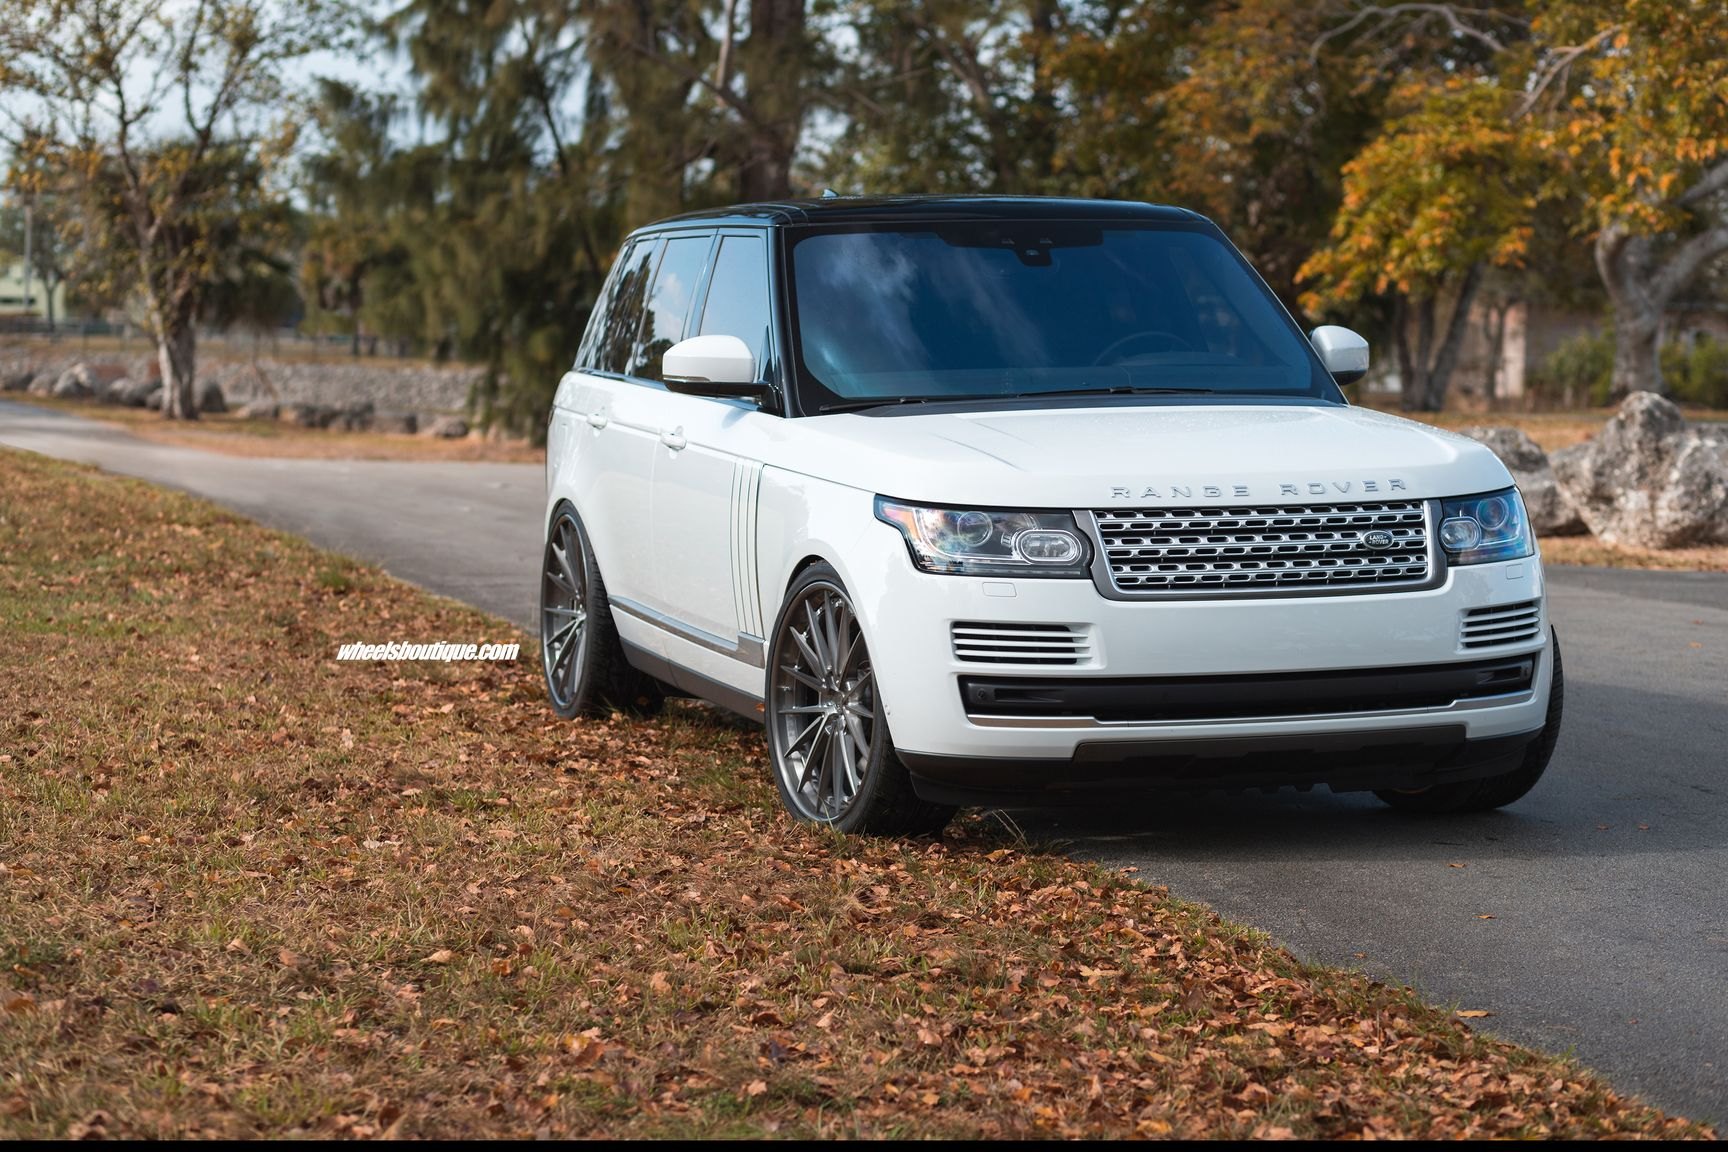 White Range Rover with Custom Projector Headlights - Photo by Anrky Wheels